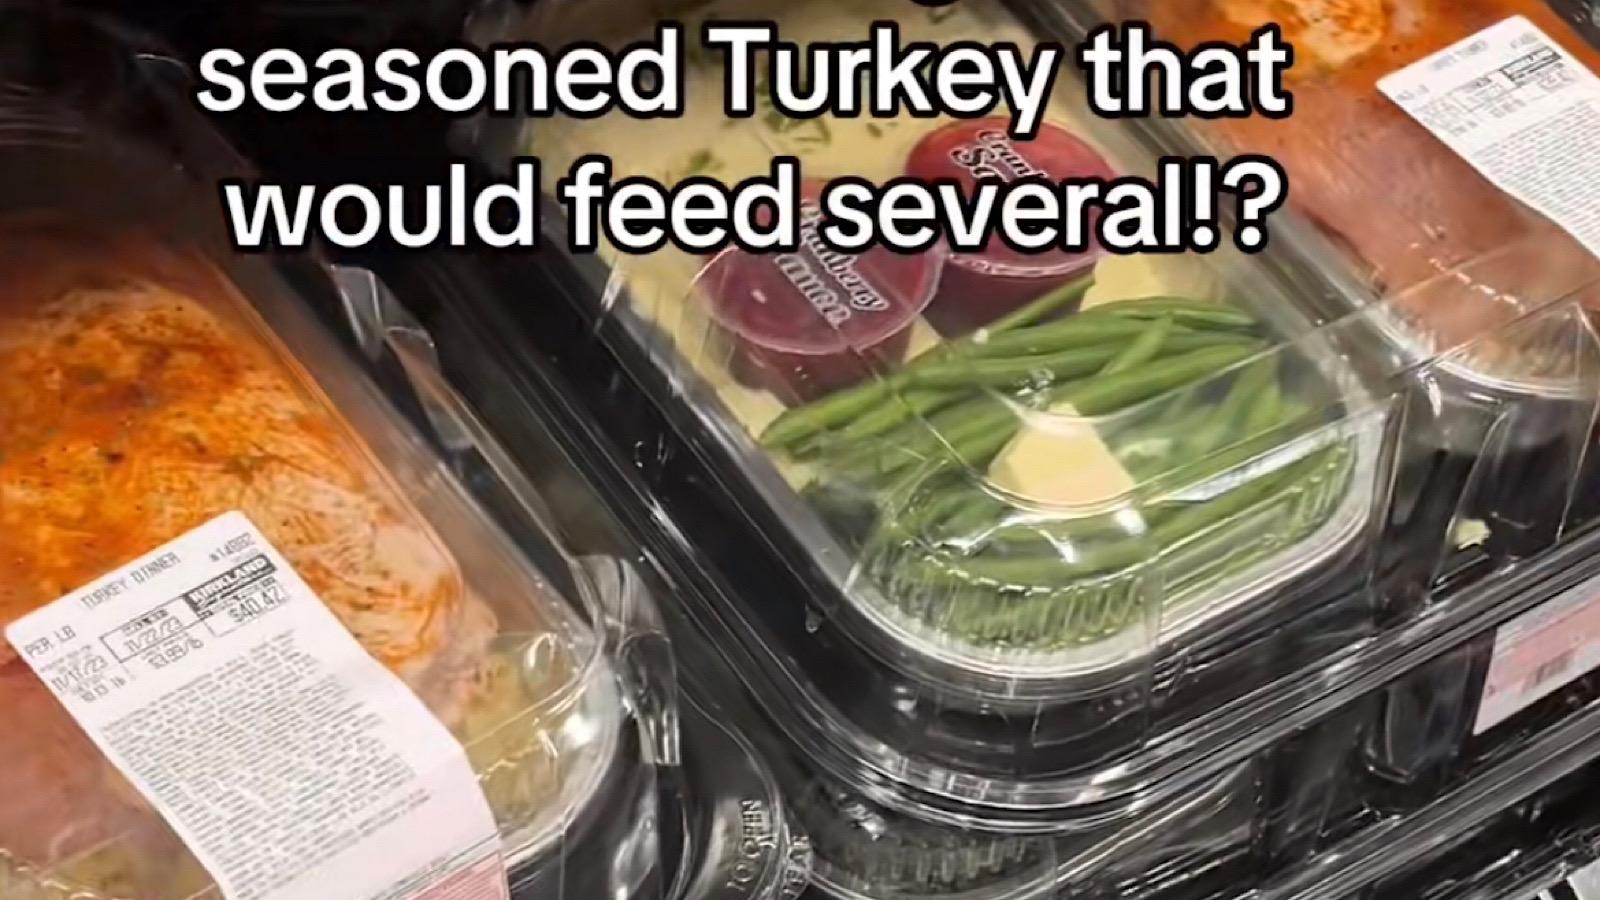 costco has a thanksgiving meal for $40